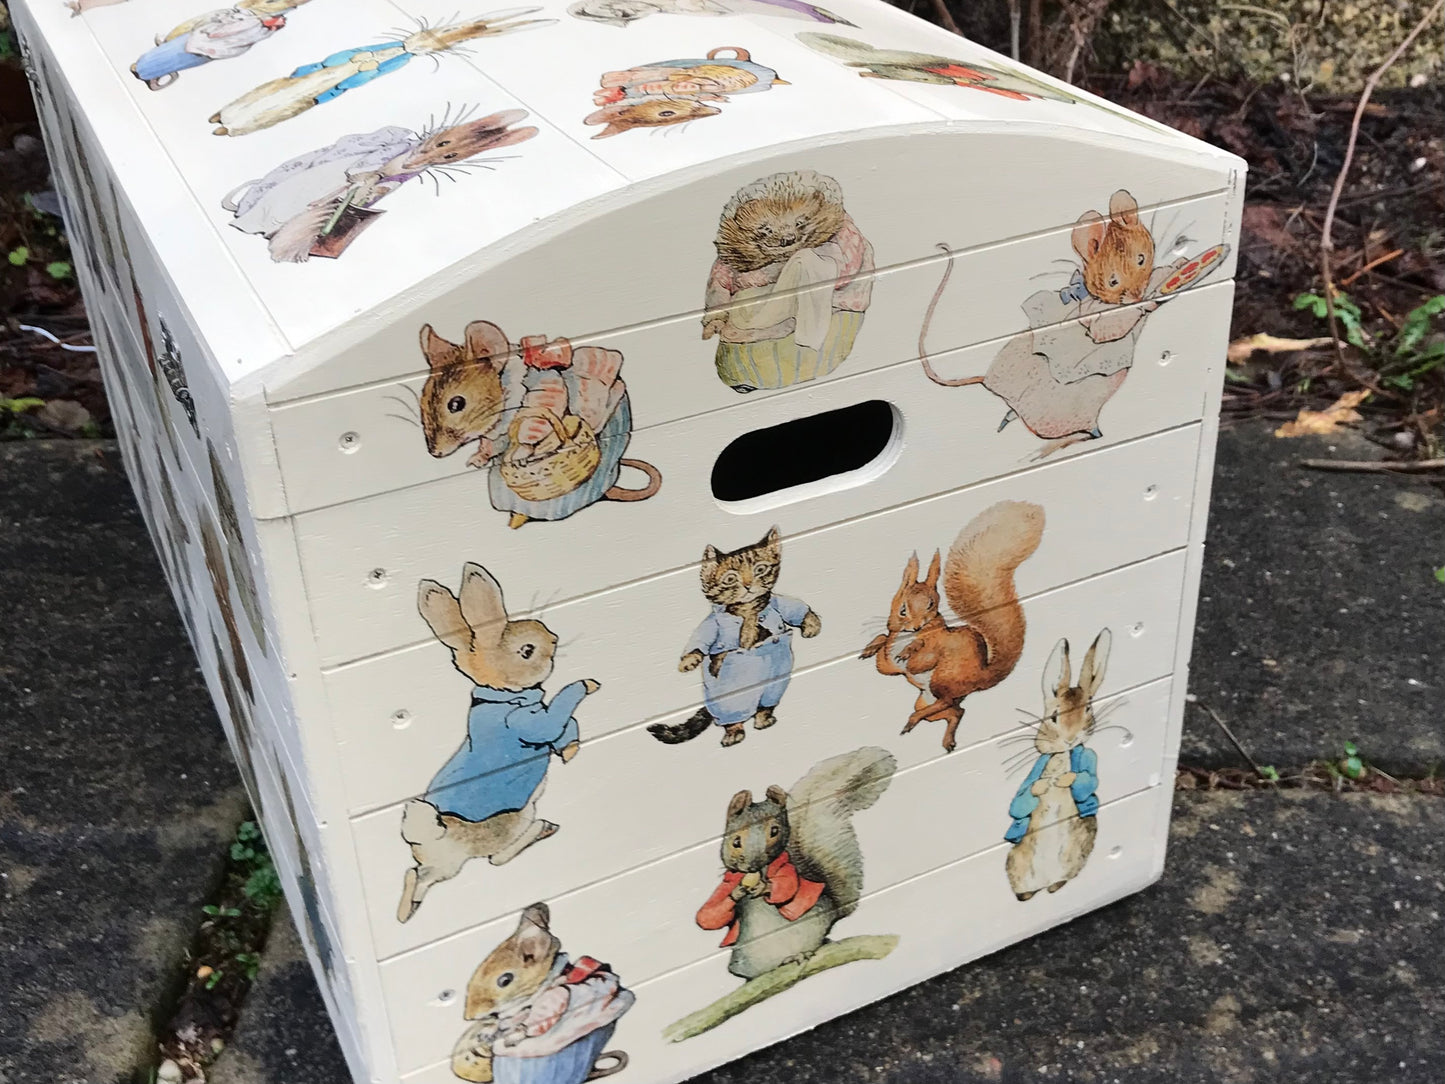 Children's personalised wooden storage chest / trunk with Beatrix Potter theme